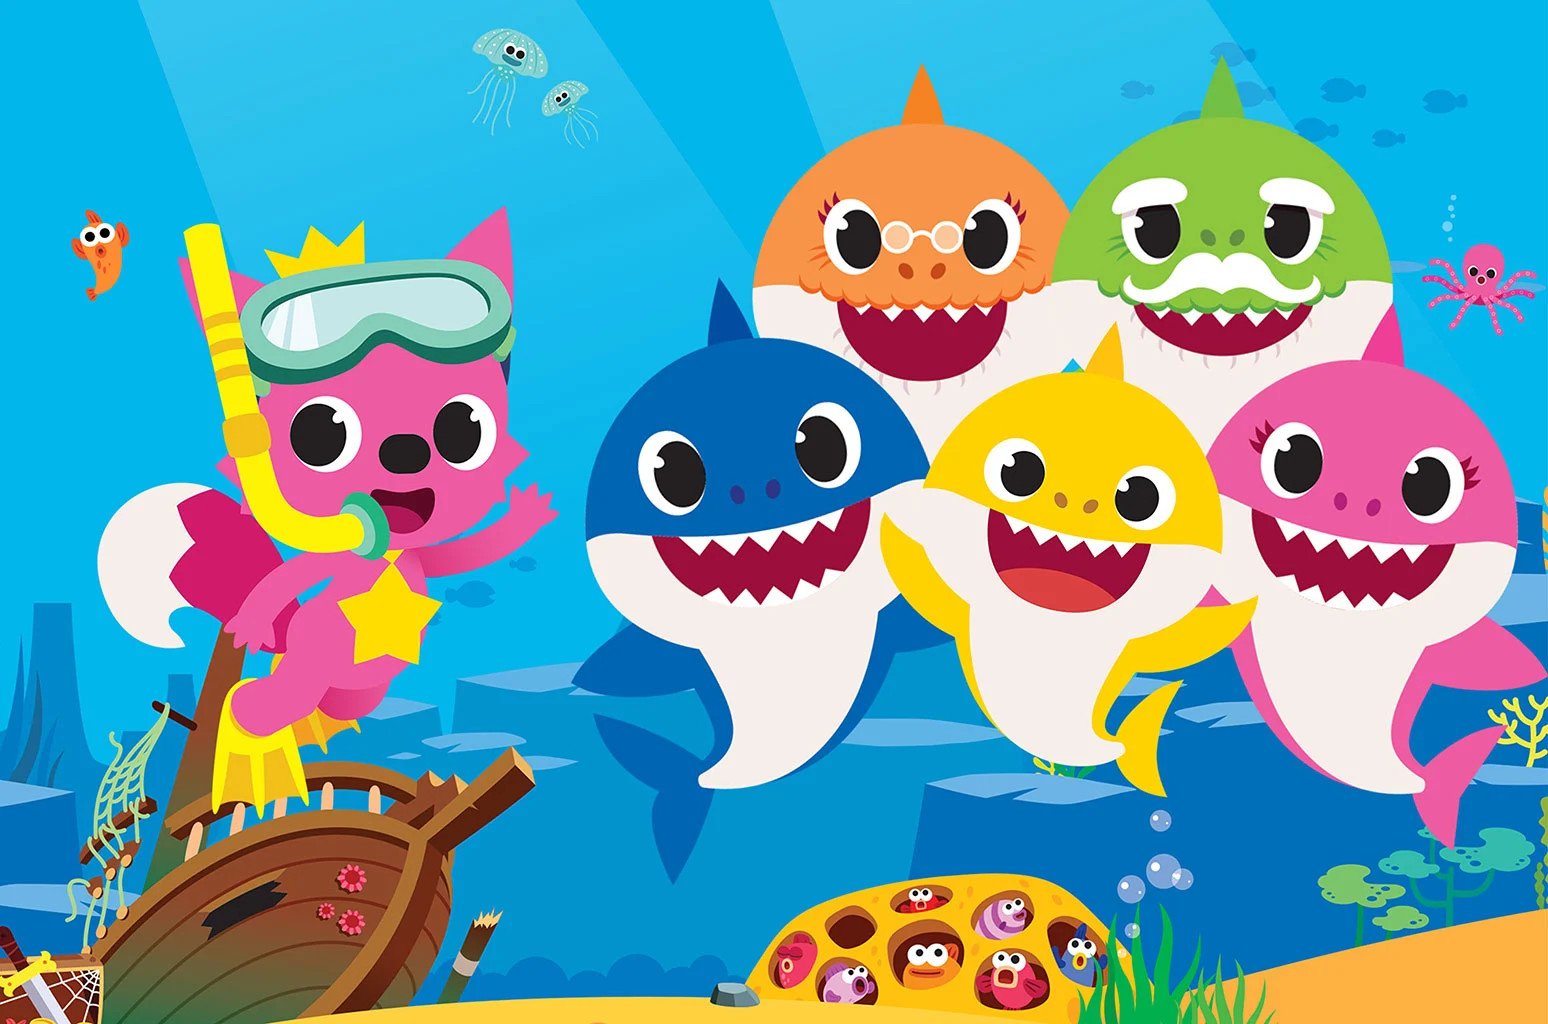 Baby Shark just hit a huge YouTube milestone thanks to your kids